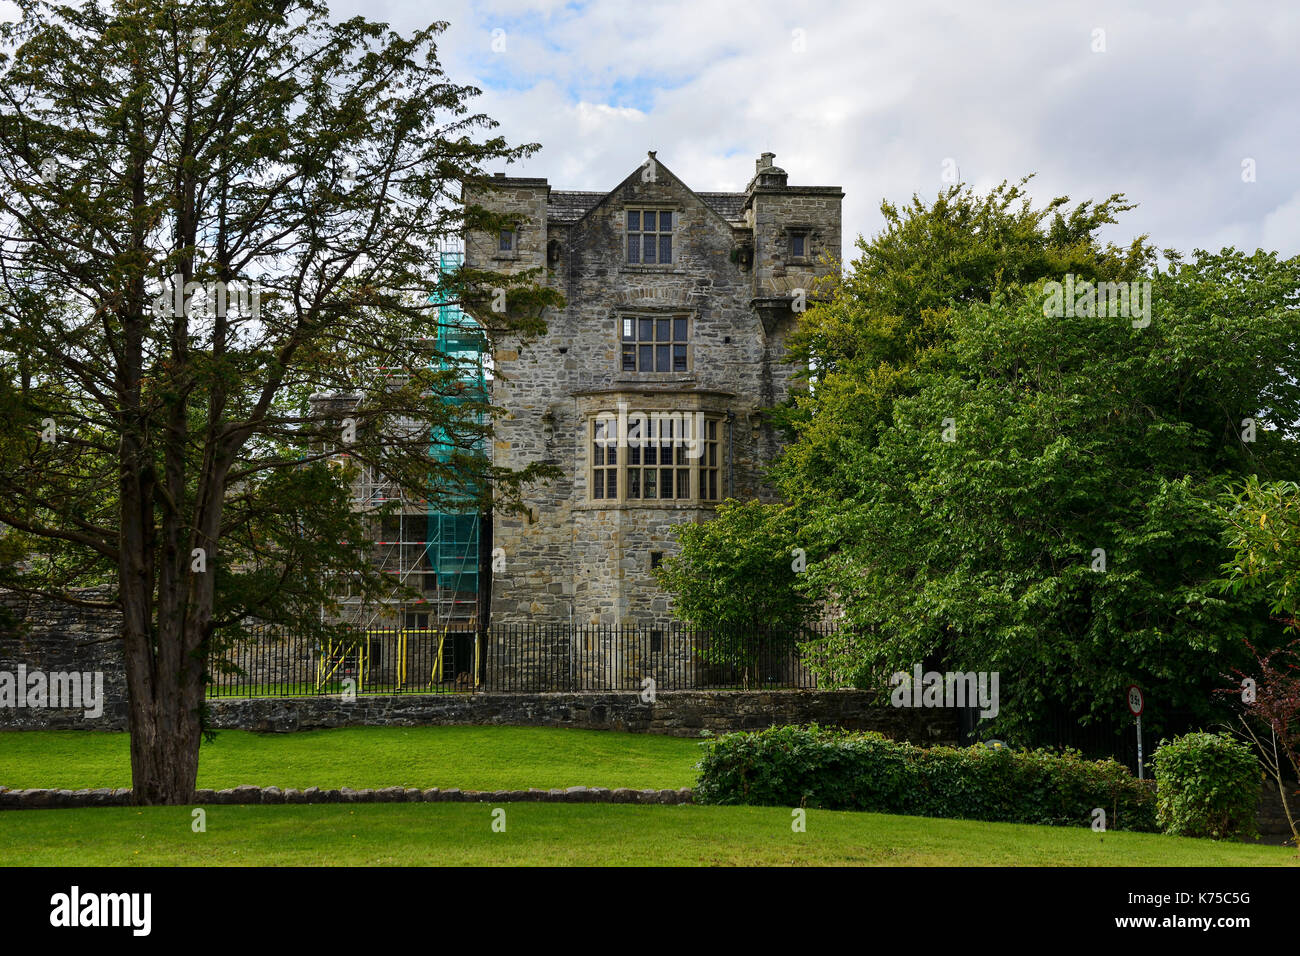 Exterior of restored 15th Century Donegal Castle in Donegal Town, County Donegal, Republic of Ireland Stock Photo